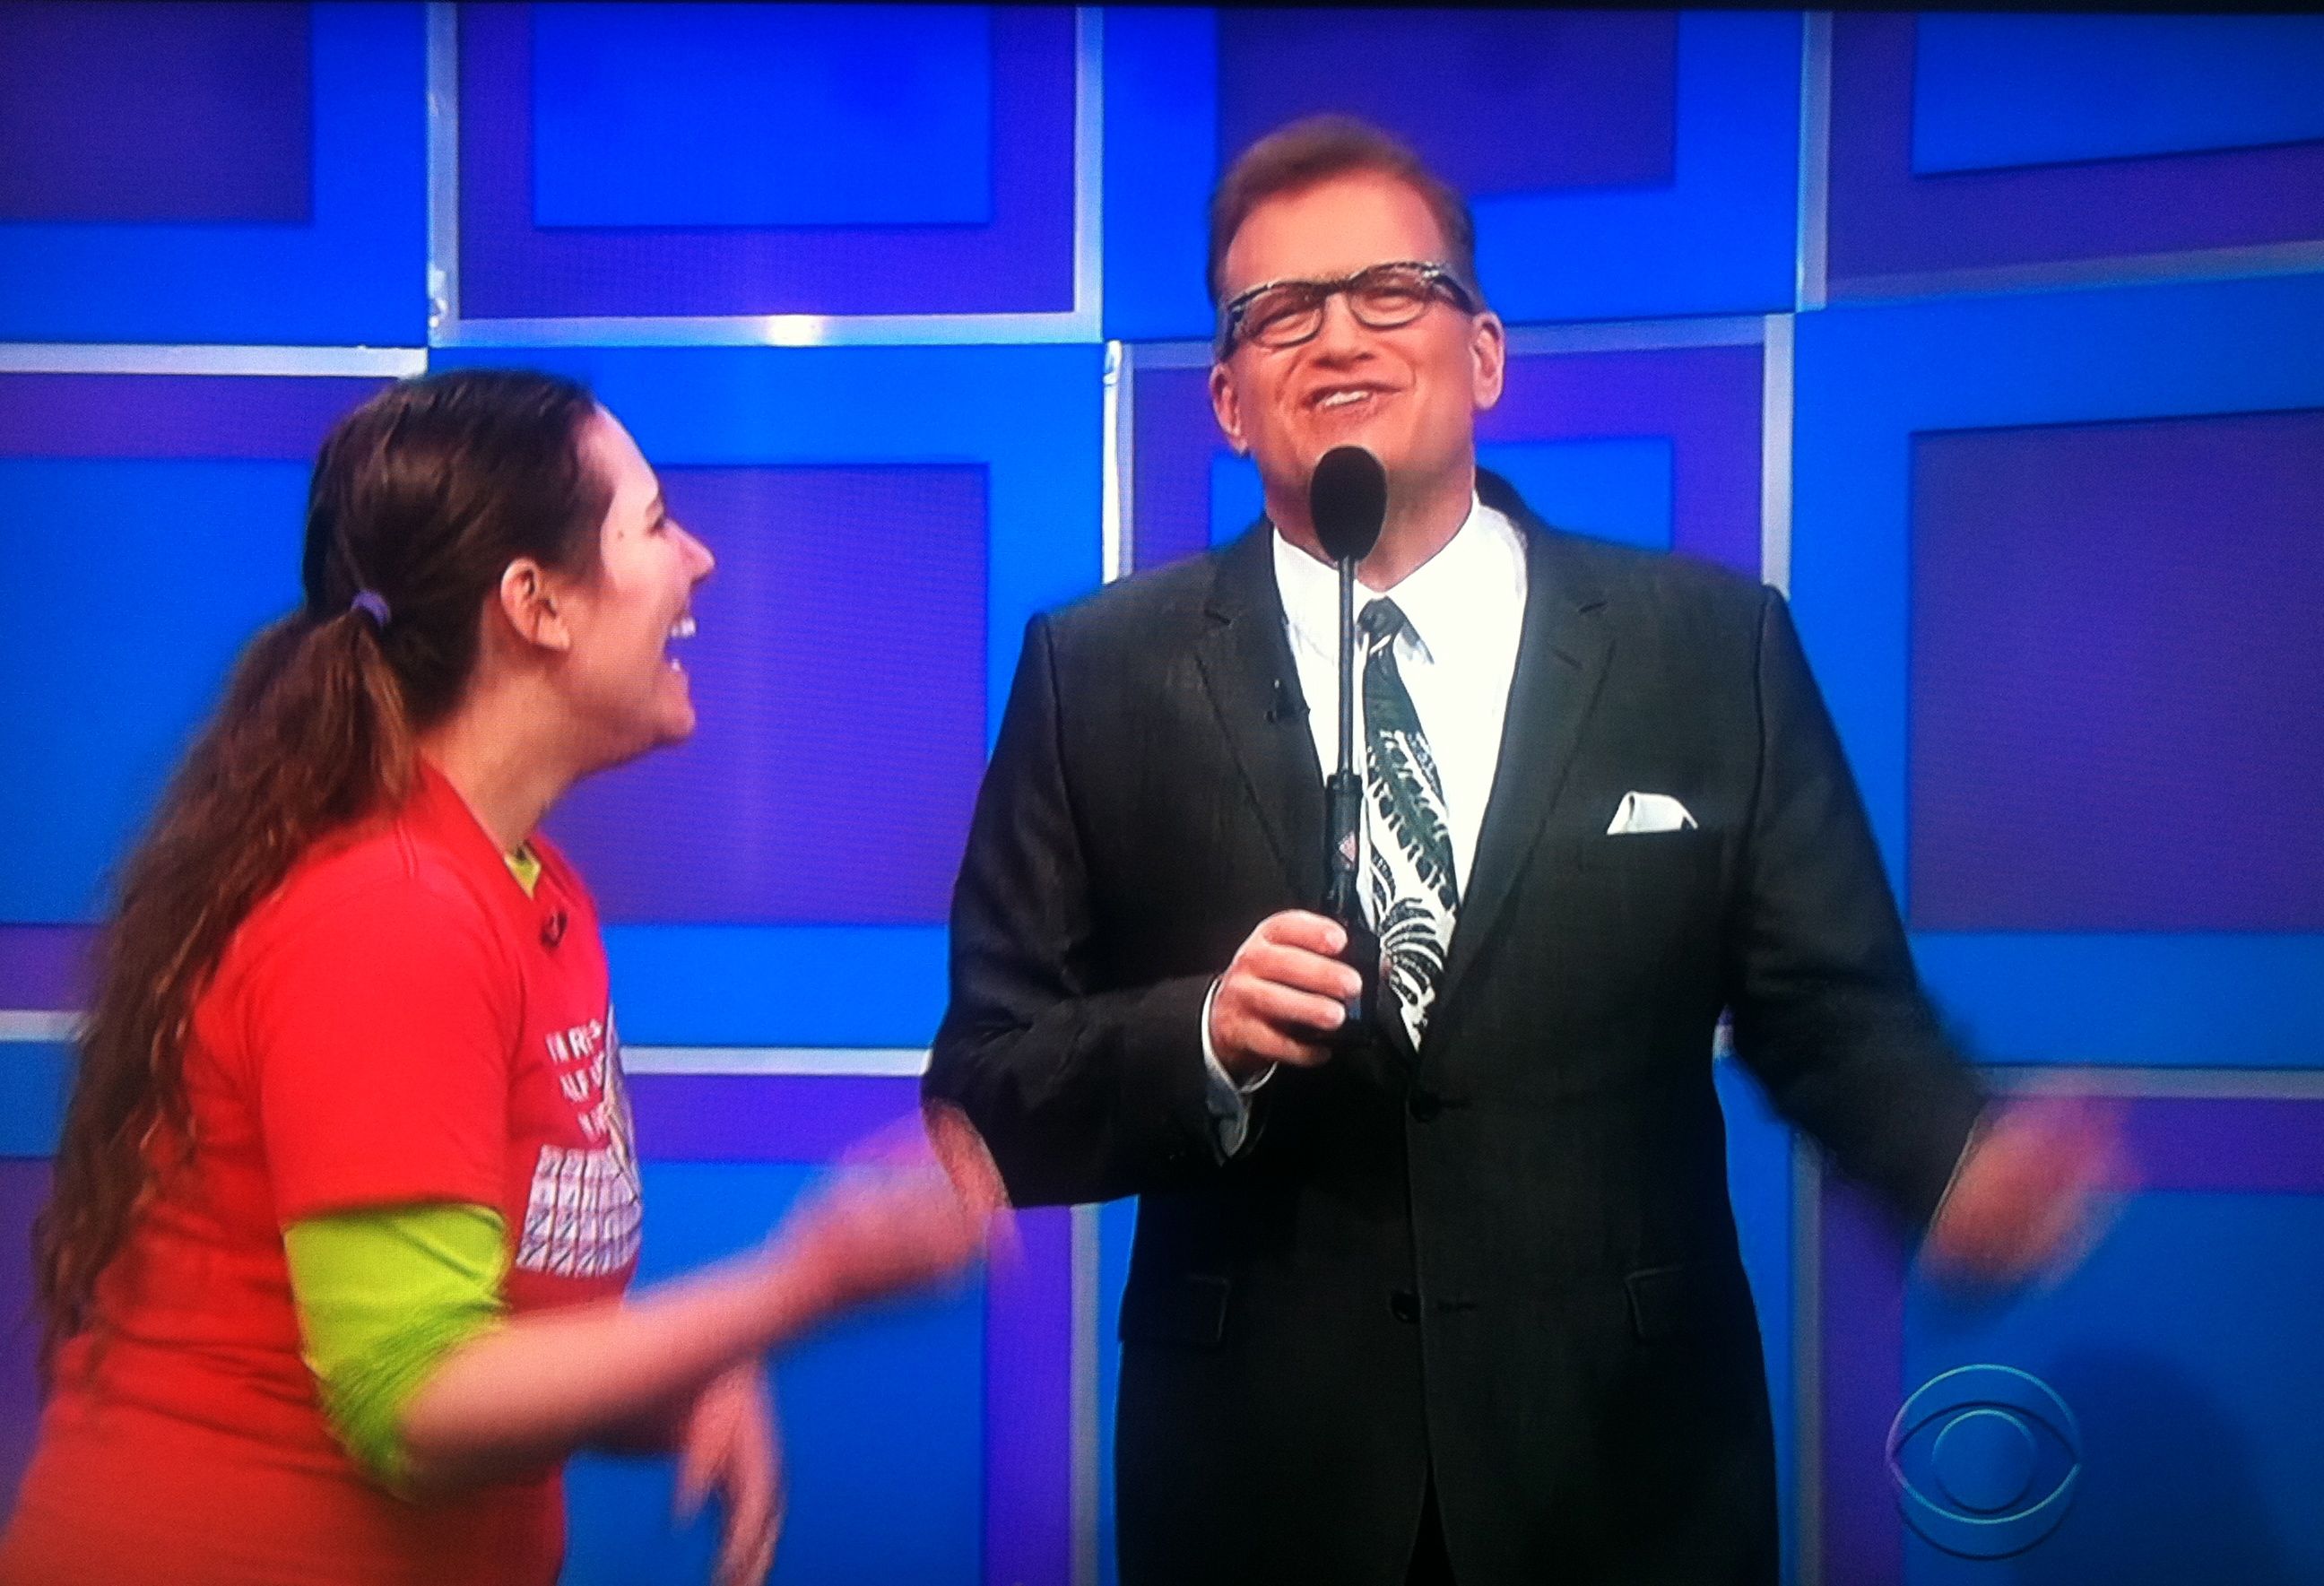 Drew Carey lightly making fun of Aurora De Lucia on The Price is Right - and she loves every second of it